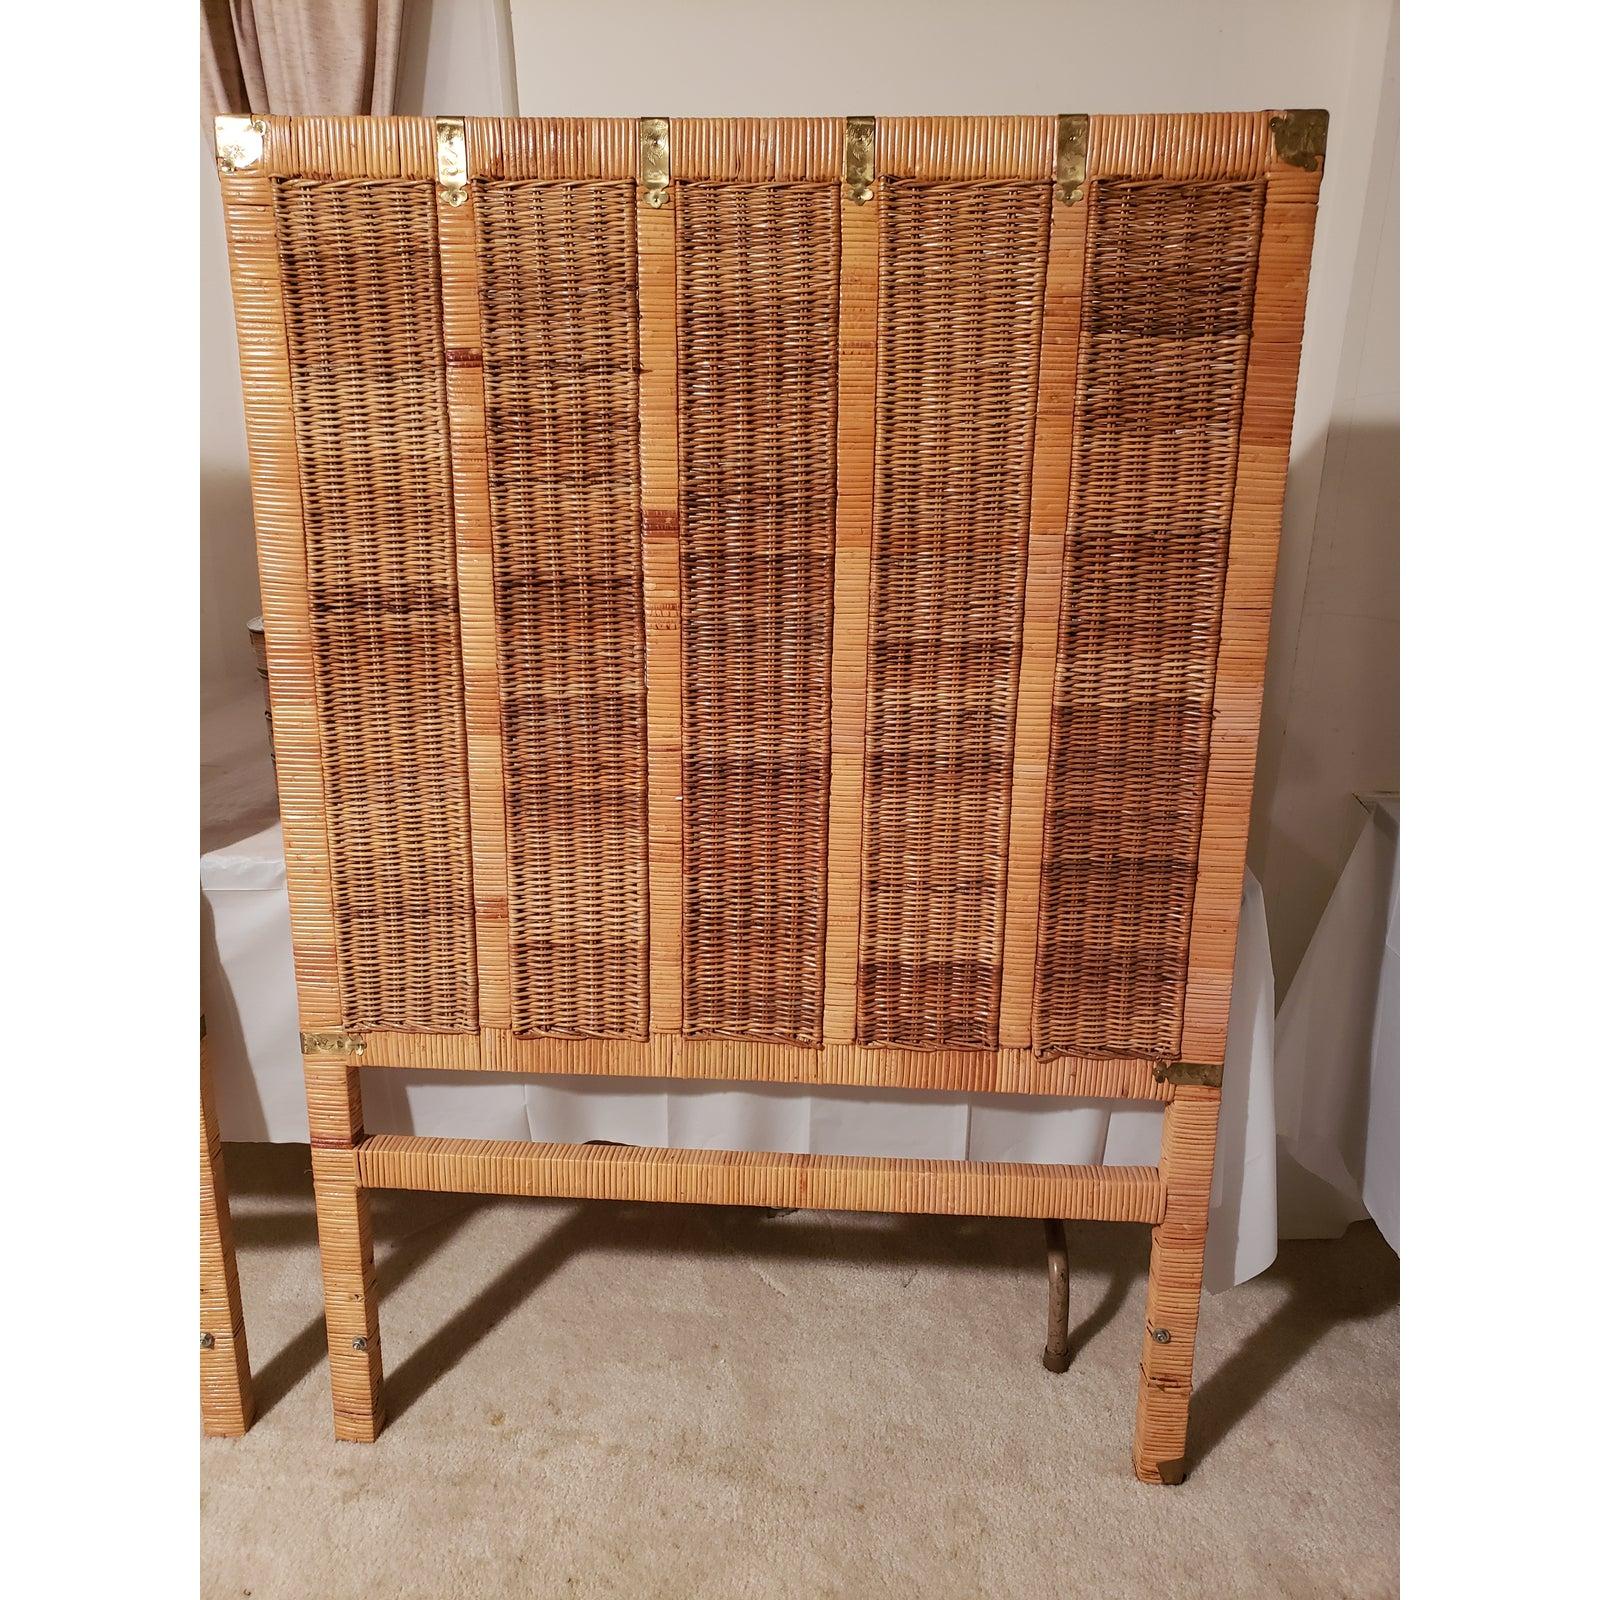 1970s Custom made Rattan wicker twin headboards. Headboards embellished with brass fittings.
Measures 42 inches in width and 58 inches in Height. 
Excellent Vintage condition.